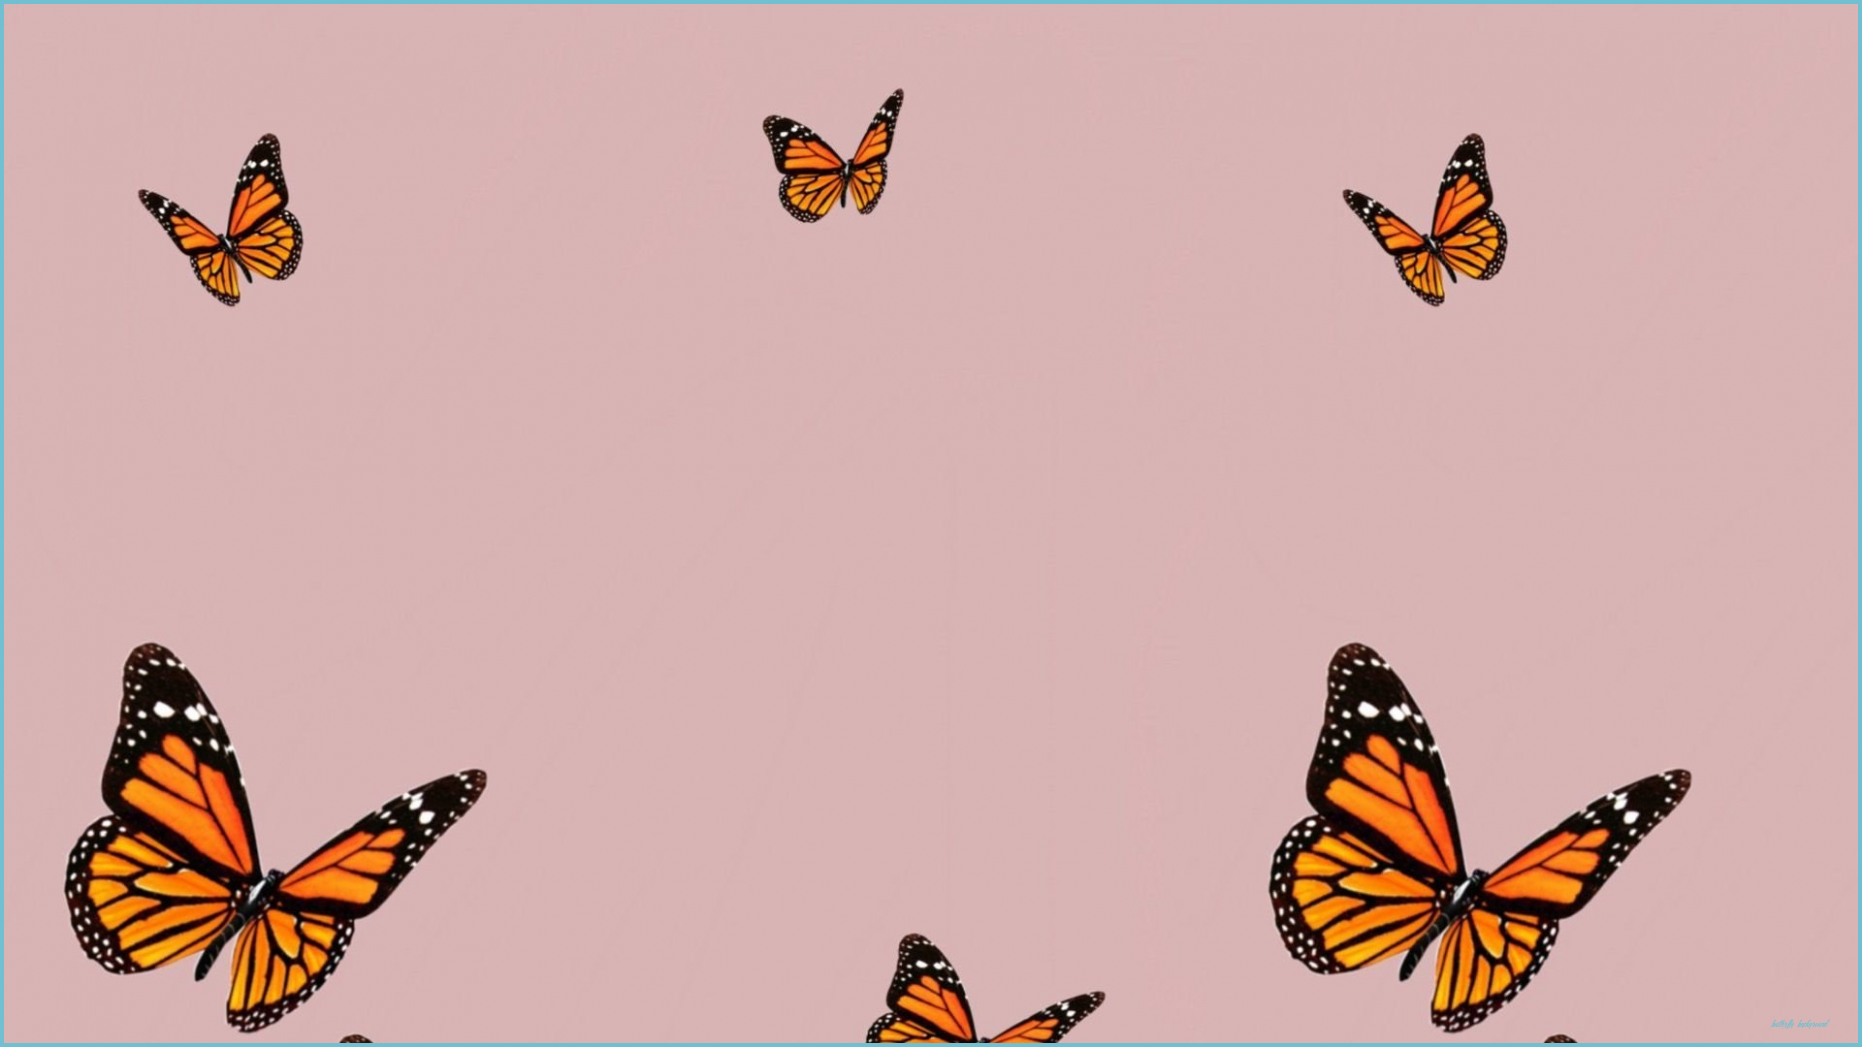 Butterfly on light peach background Wallpaper, iPhone